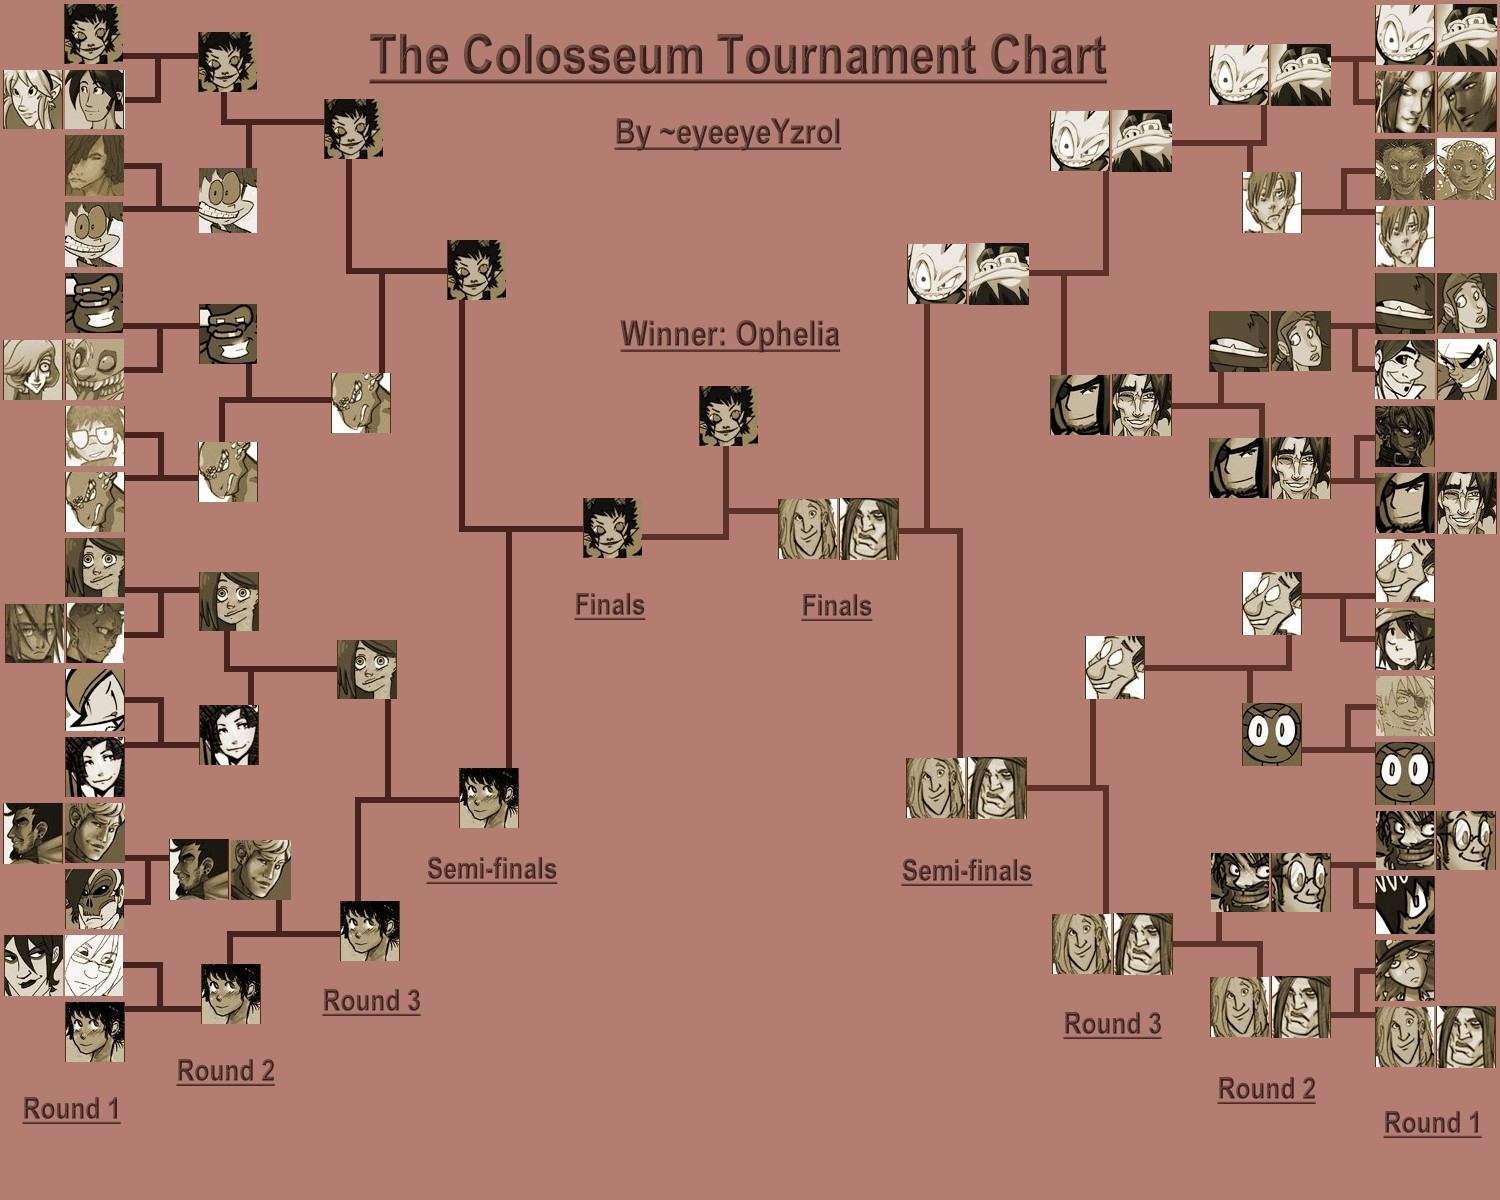 The Colosseum Chart